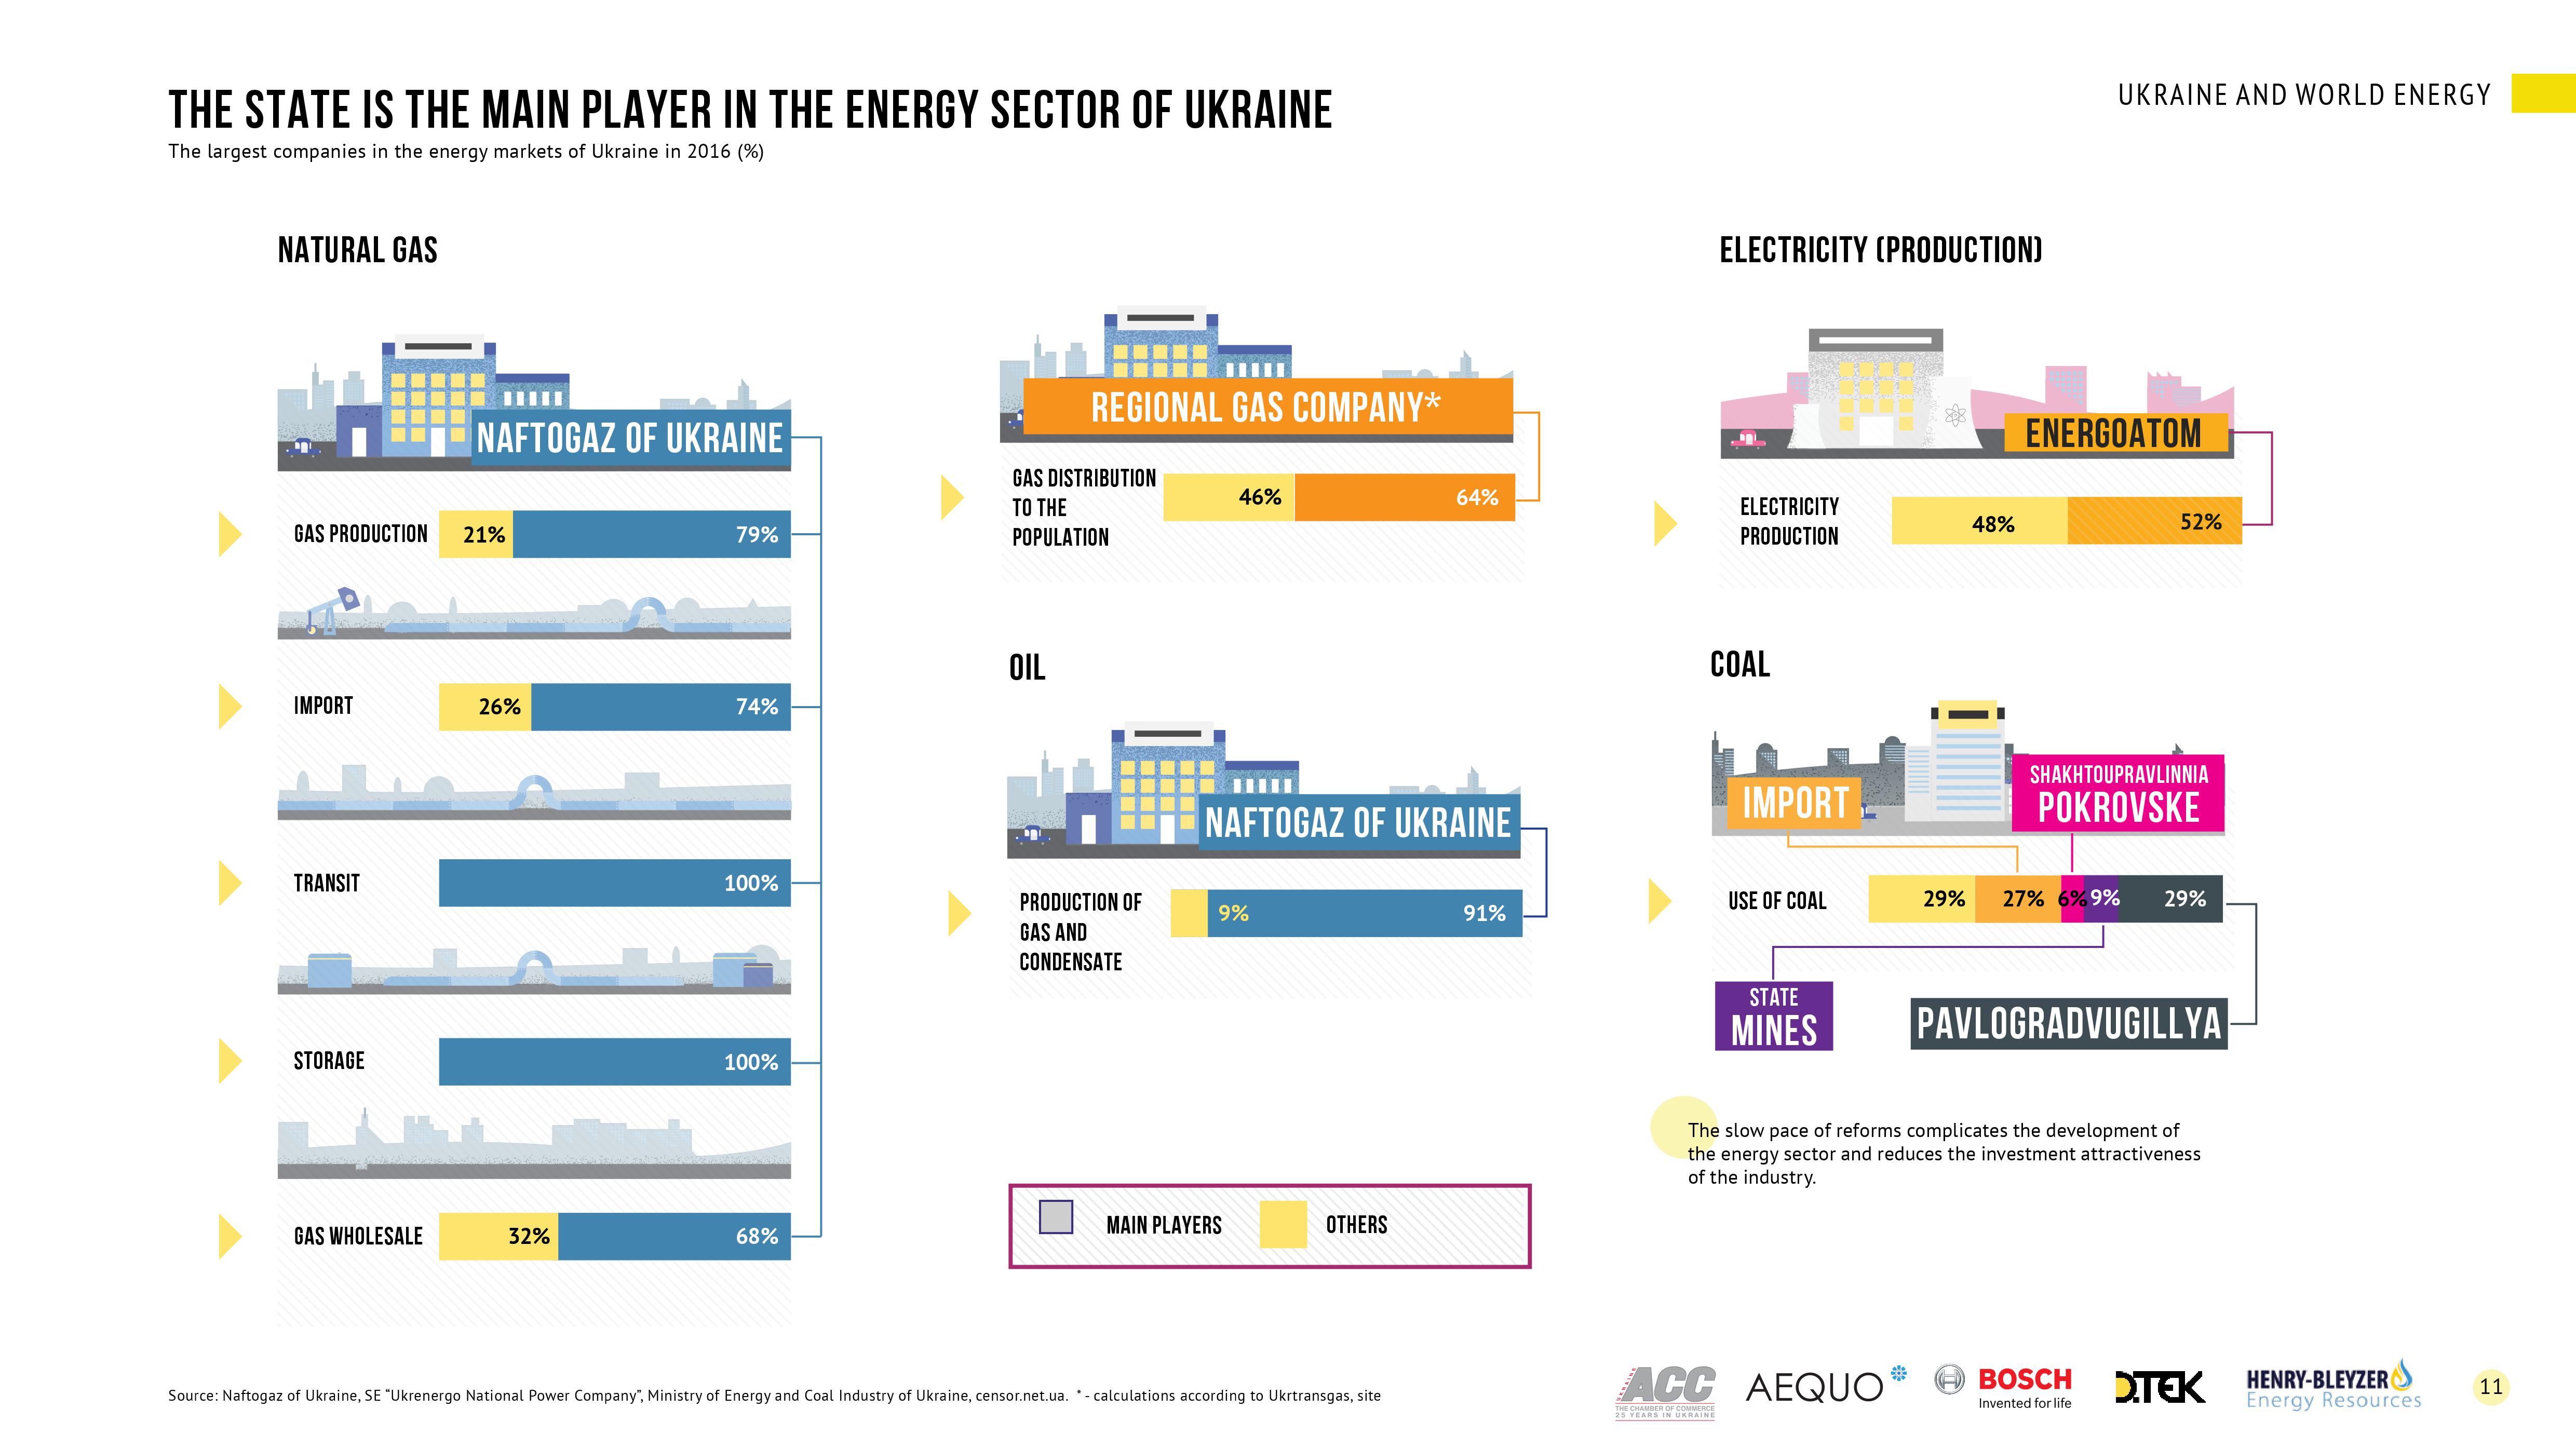 main player in the energy sector of Ukraine